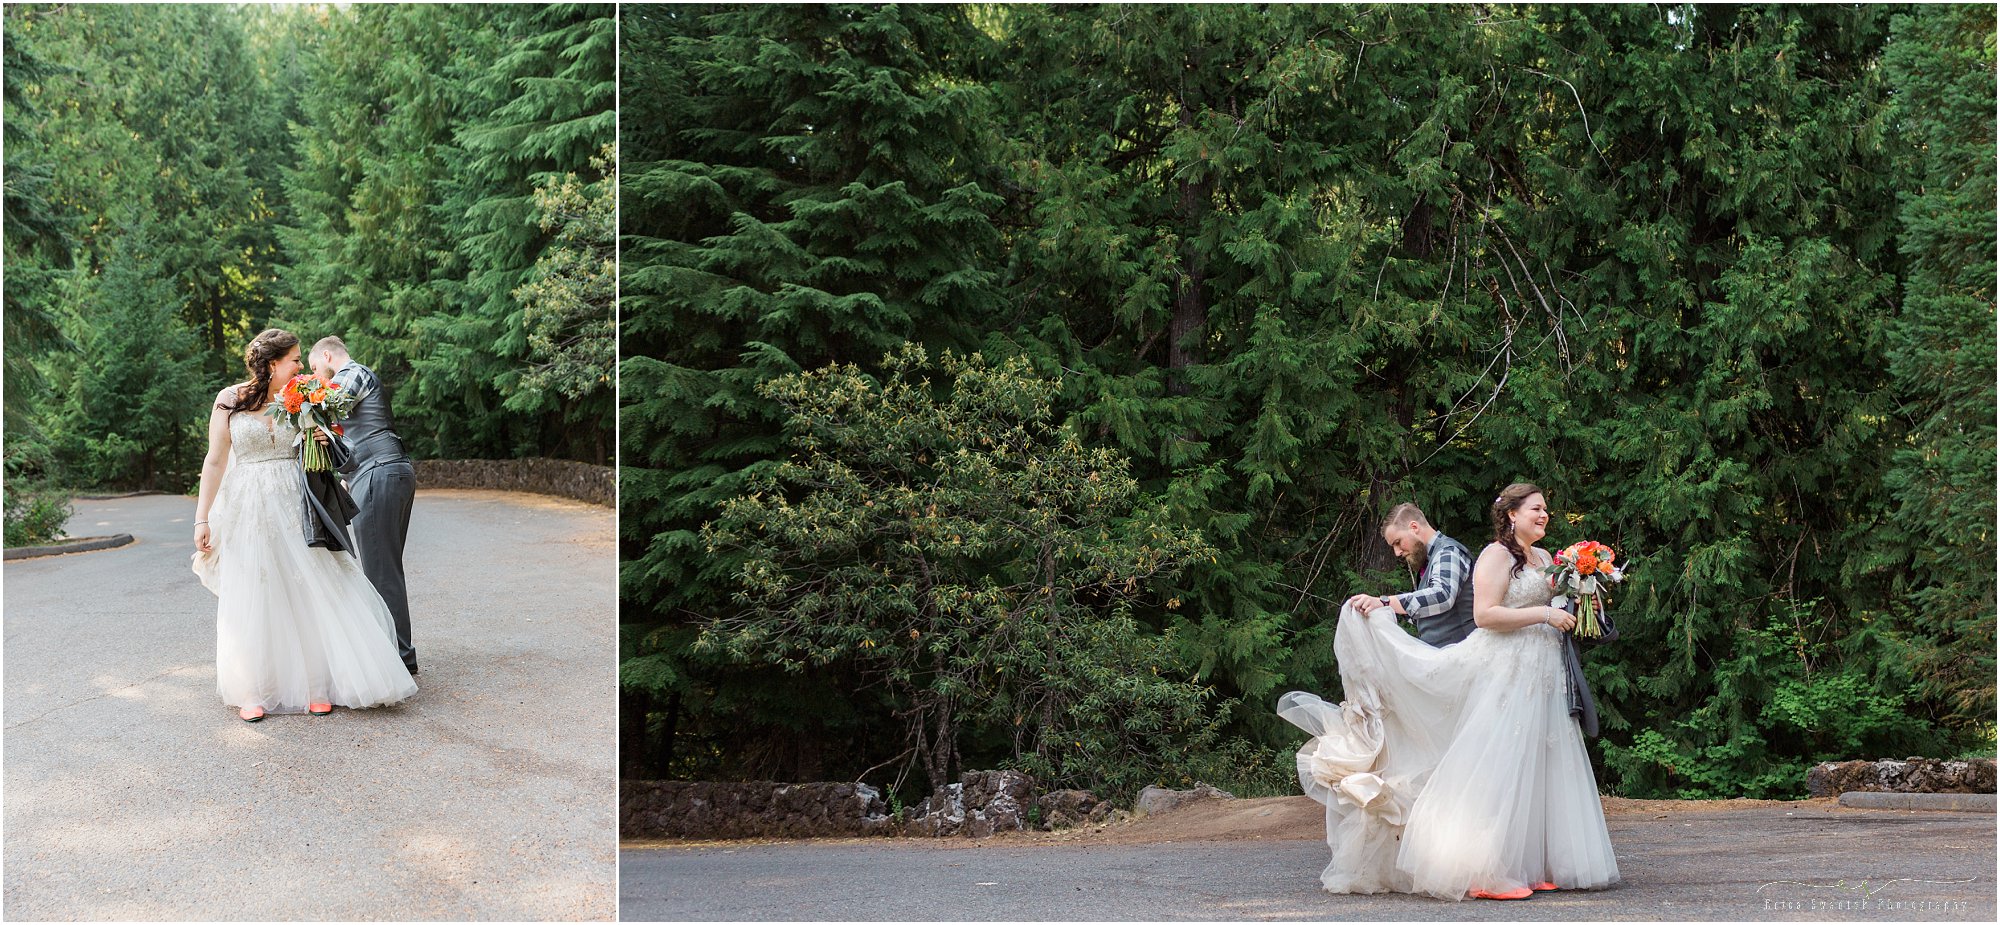 A groom helps shake the dust off his bride's gorgeous Stella York wedding gown after their intimate Oregon waterfall wedding ceremony. | Erica Swantek Photography